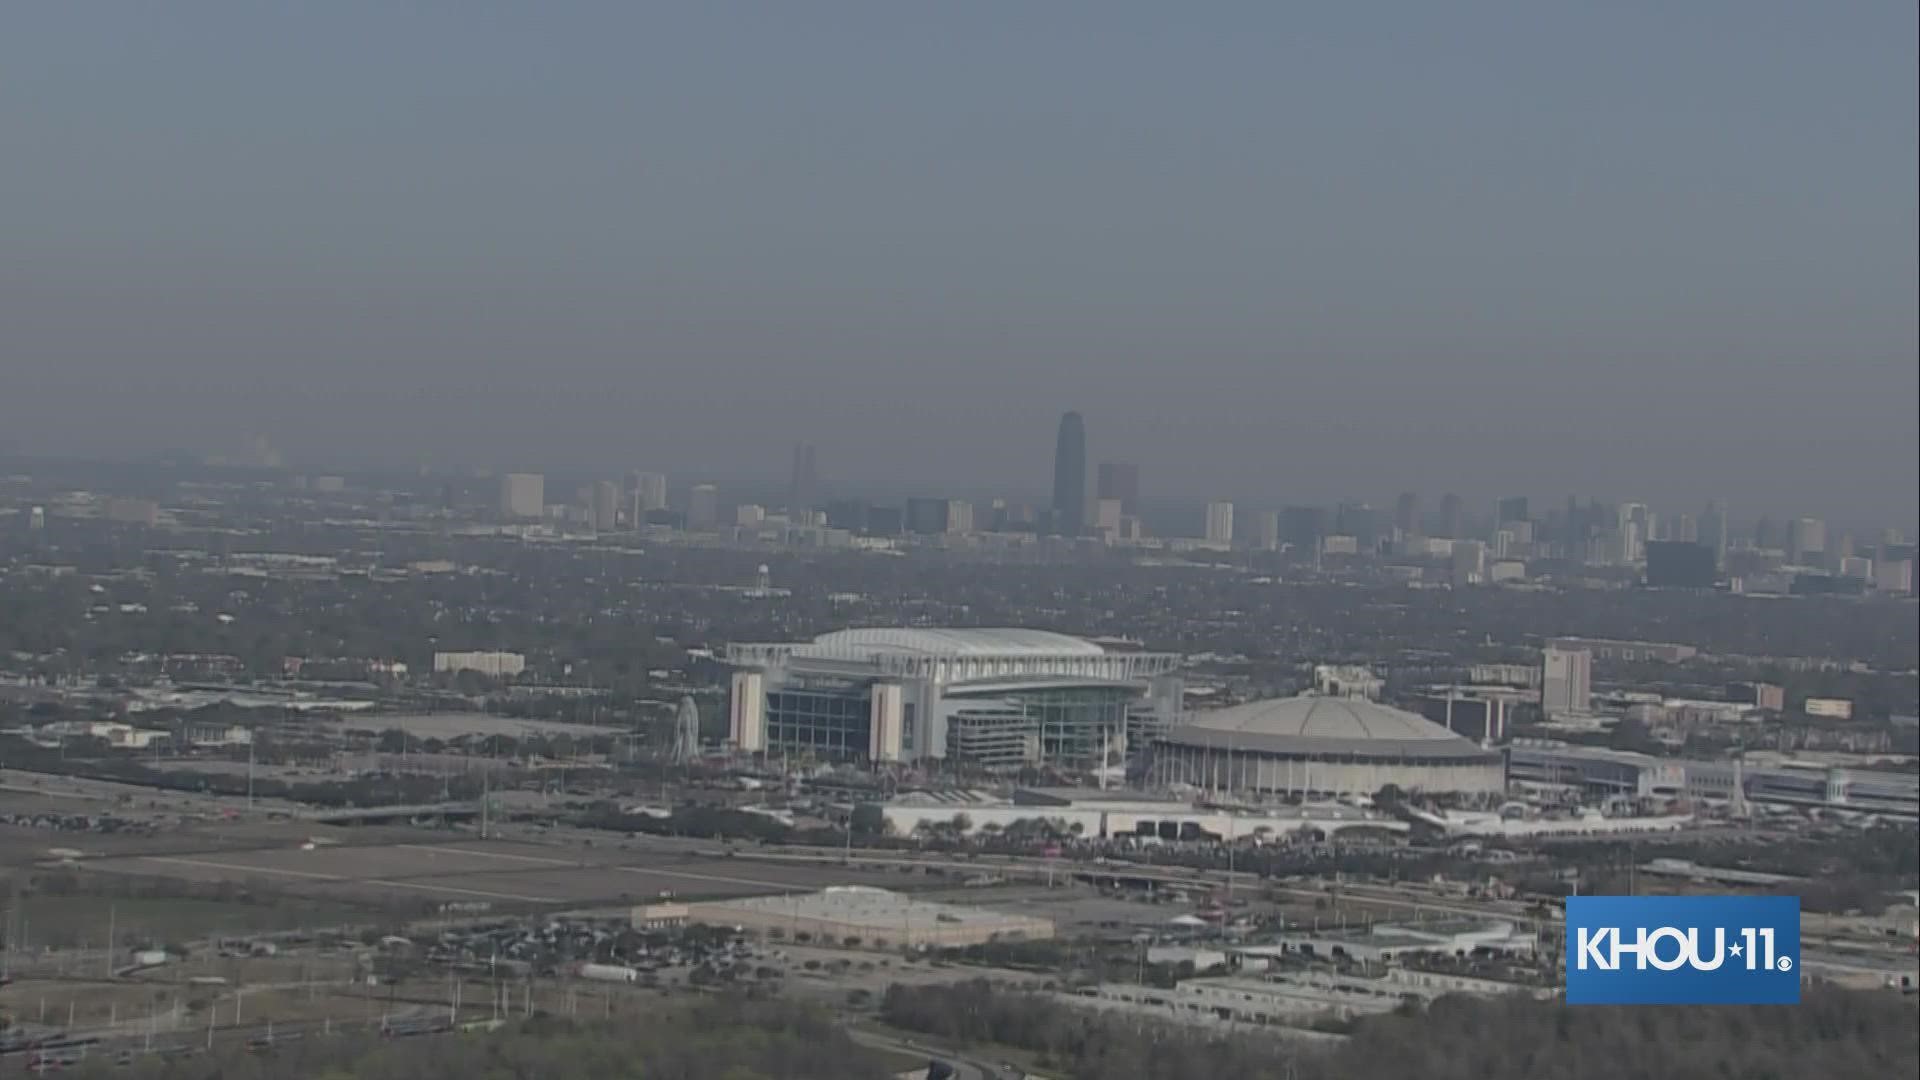 Air 11 flew over the area Friday morning as smoke from Texas wildfires hundreds of miles away drifted into Houston.